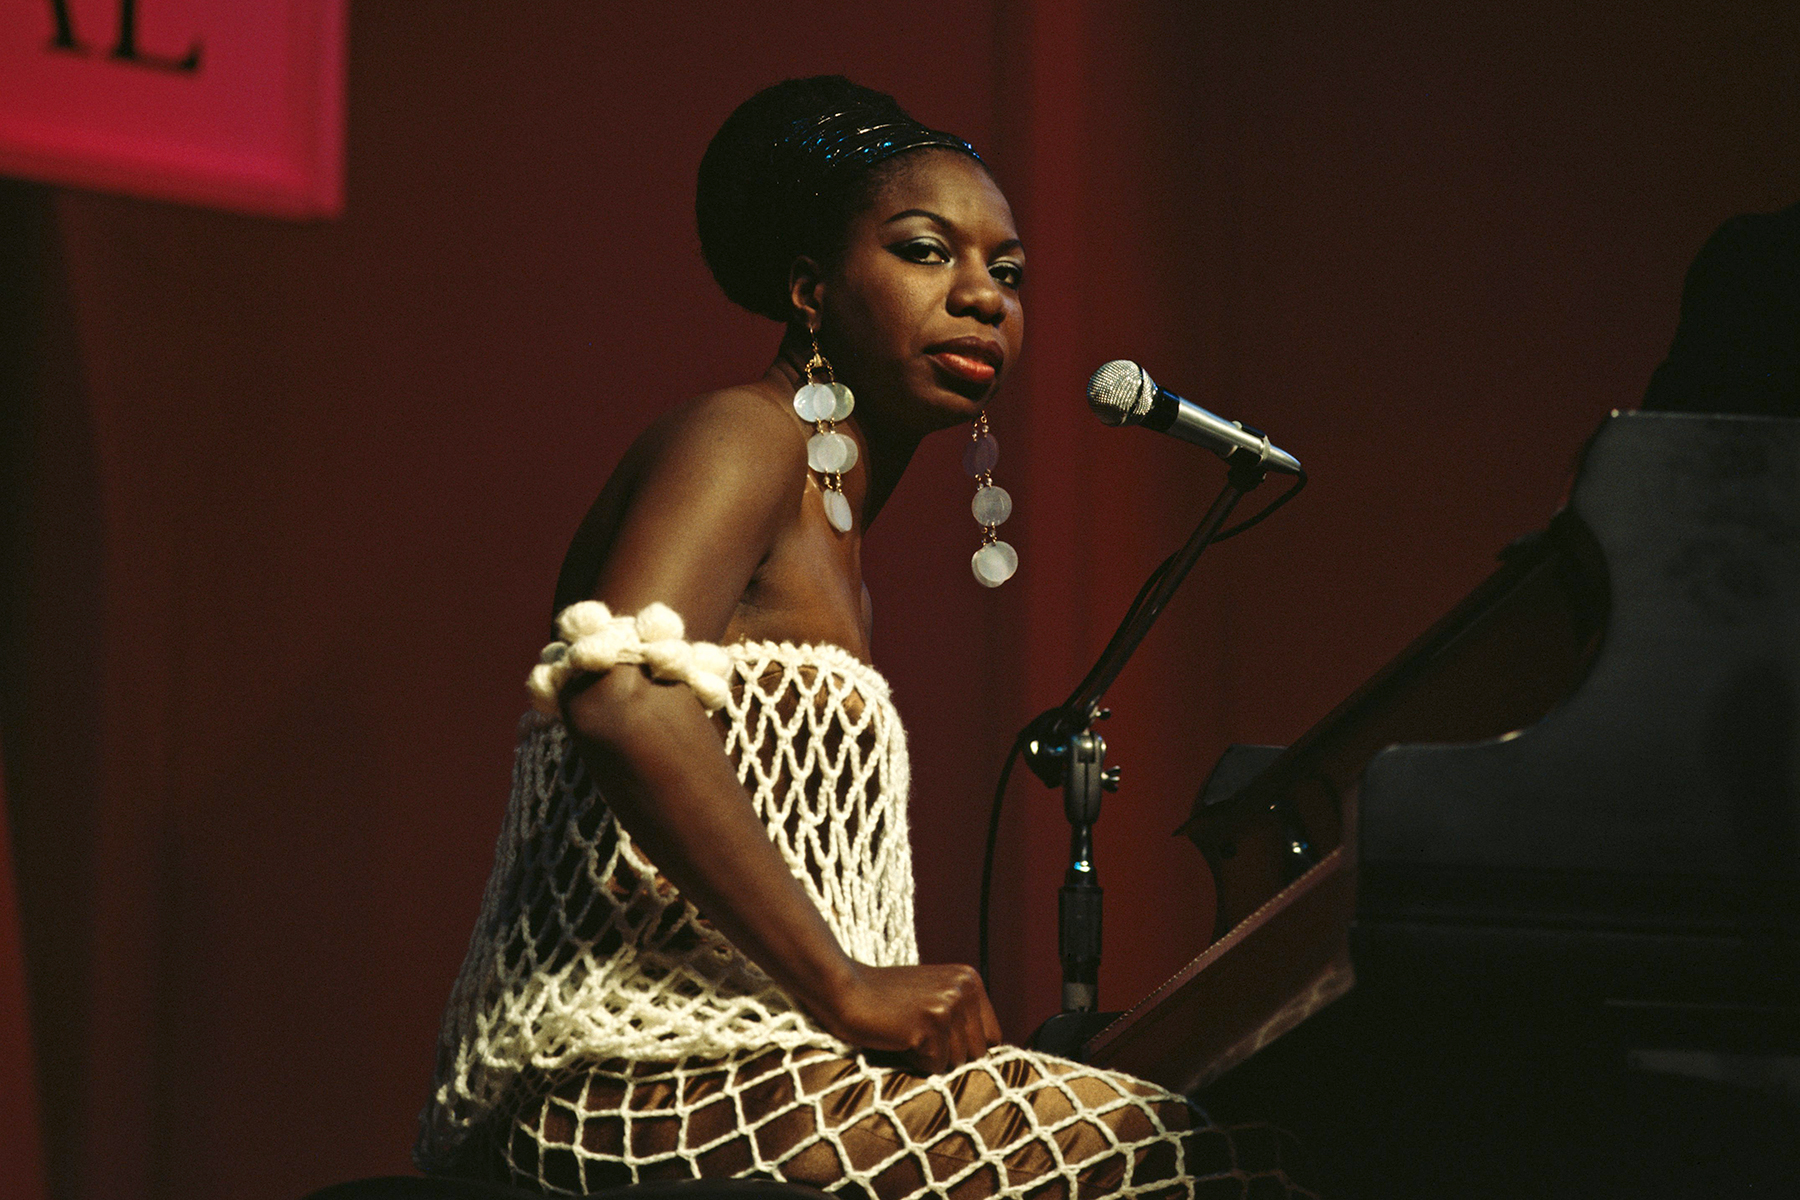 American singer, songwriter, pianist and civil rights activist Nina Simone (1933-2003) performs live on stage at Newport Jazz Festival in Newport, Rhode Island, United States on 4th July 1968. David Redfern Premium Collection. (Photo by David Redfern/Redferns)